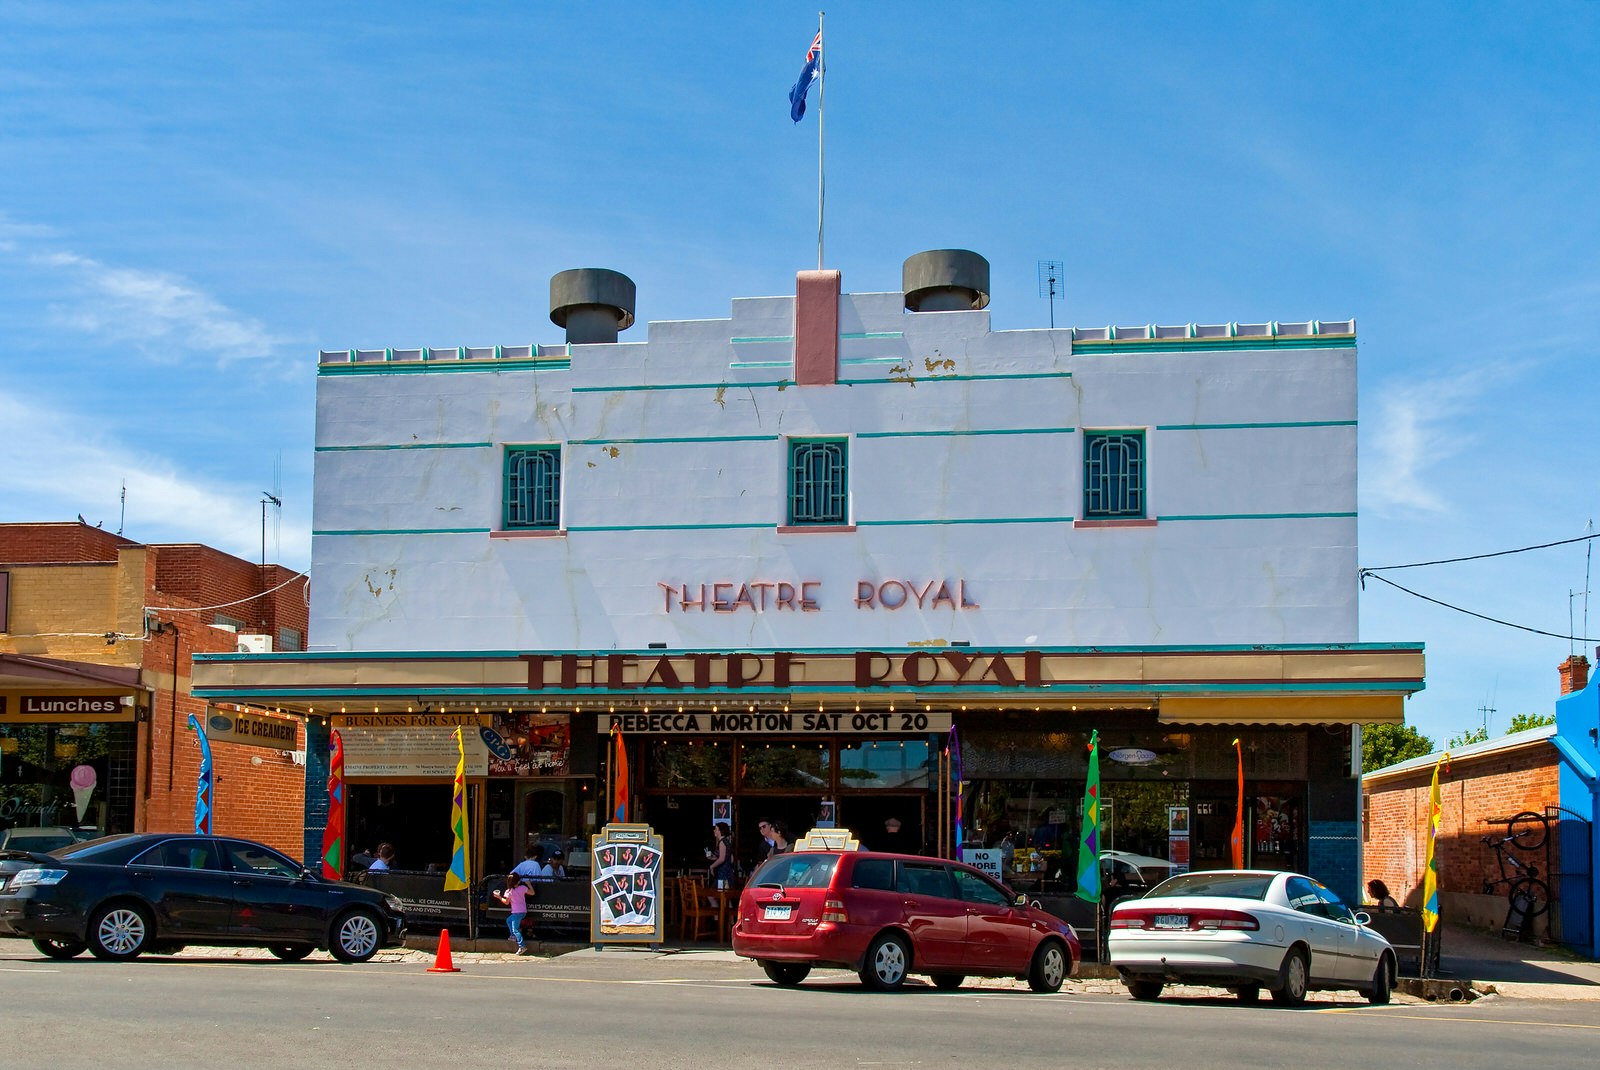 The historic Theatre Royal in the central Victorian town of Castlemaine is one of the last remaining Art Deco movie houses in rural Australia.